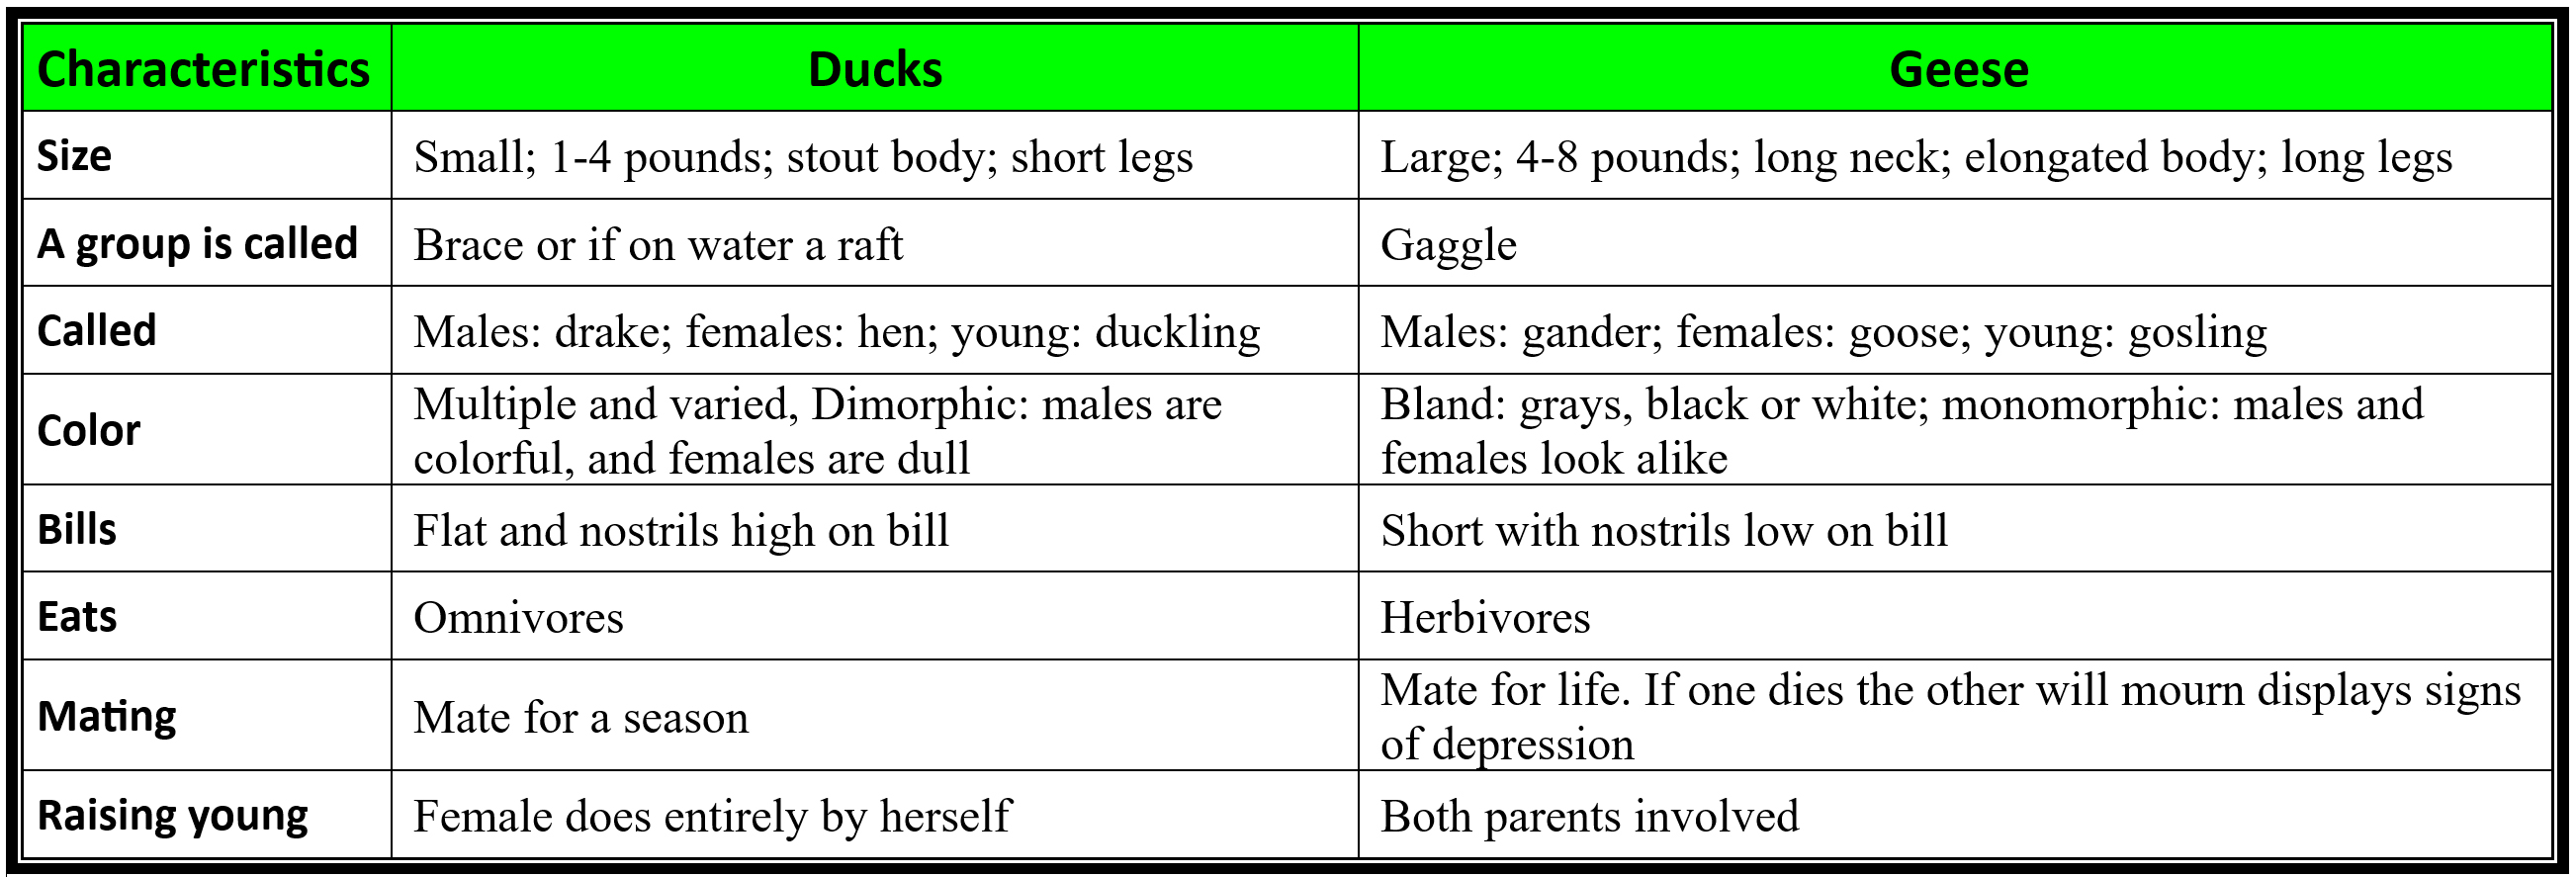 Comparsion of physical difference between ducks and geese.